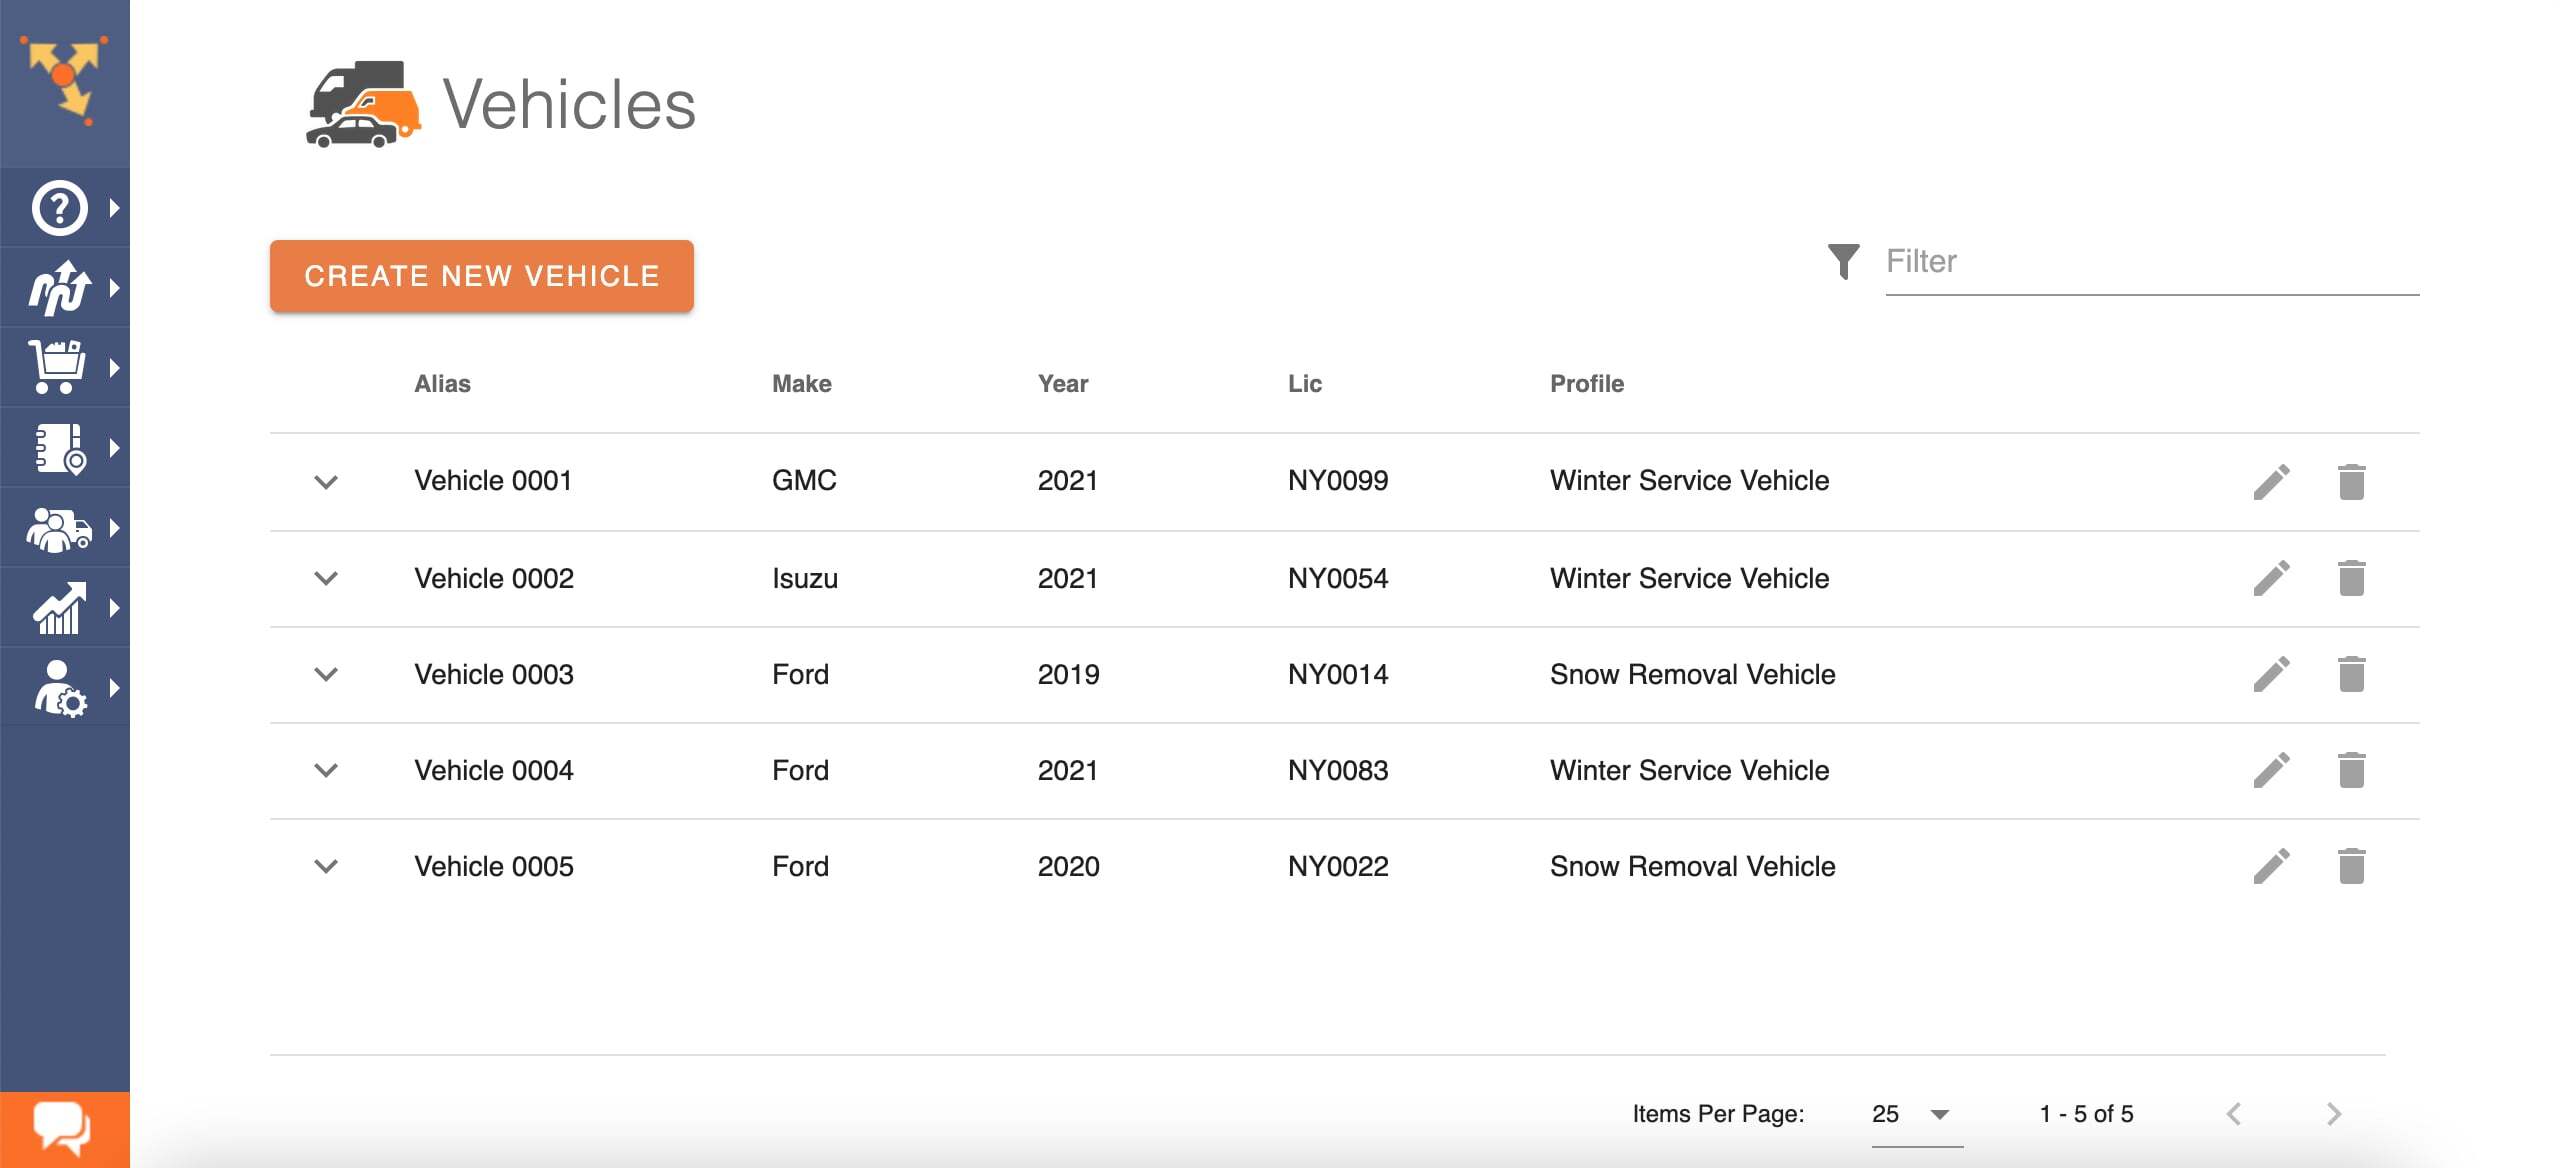 Creating profiles for snow blower, snow plows, gritter, and other winter service vehicles on snow removal software.